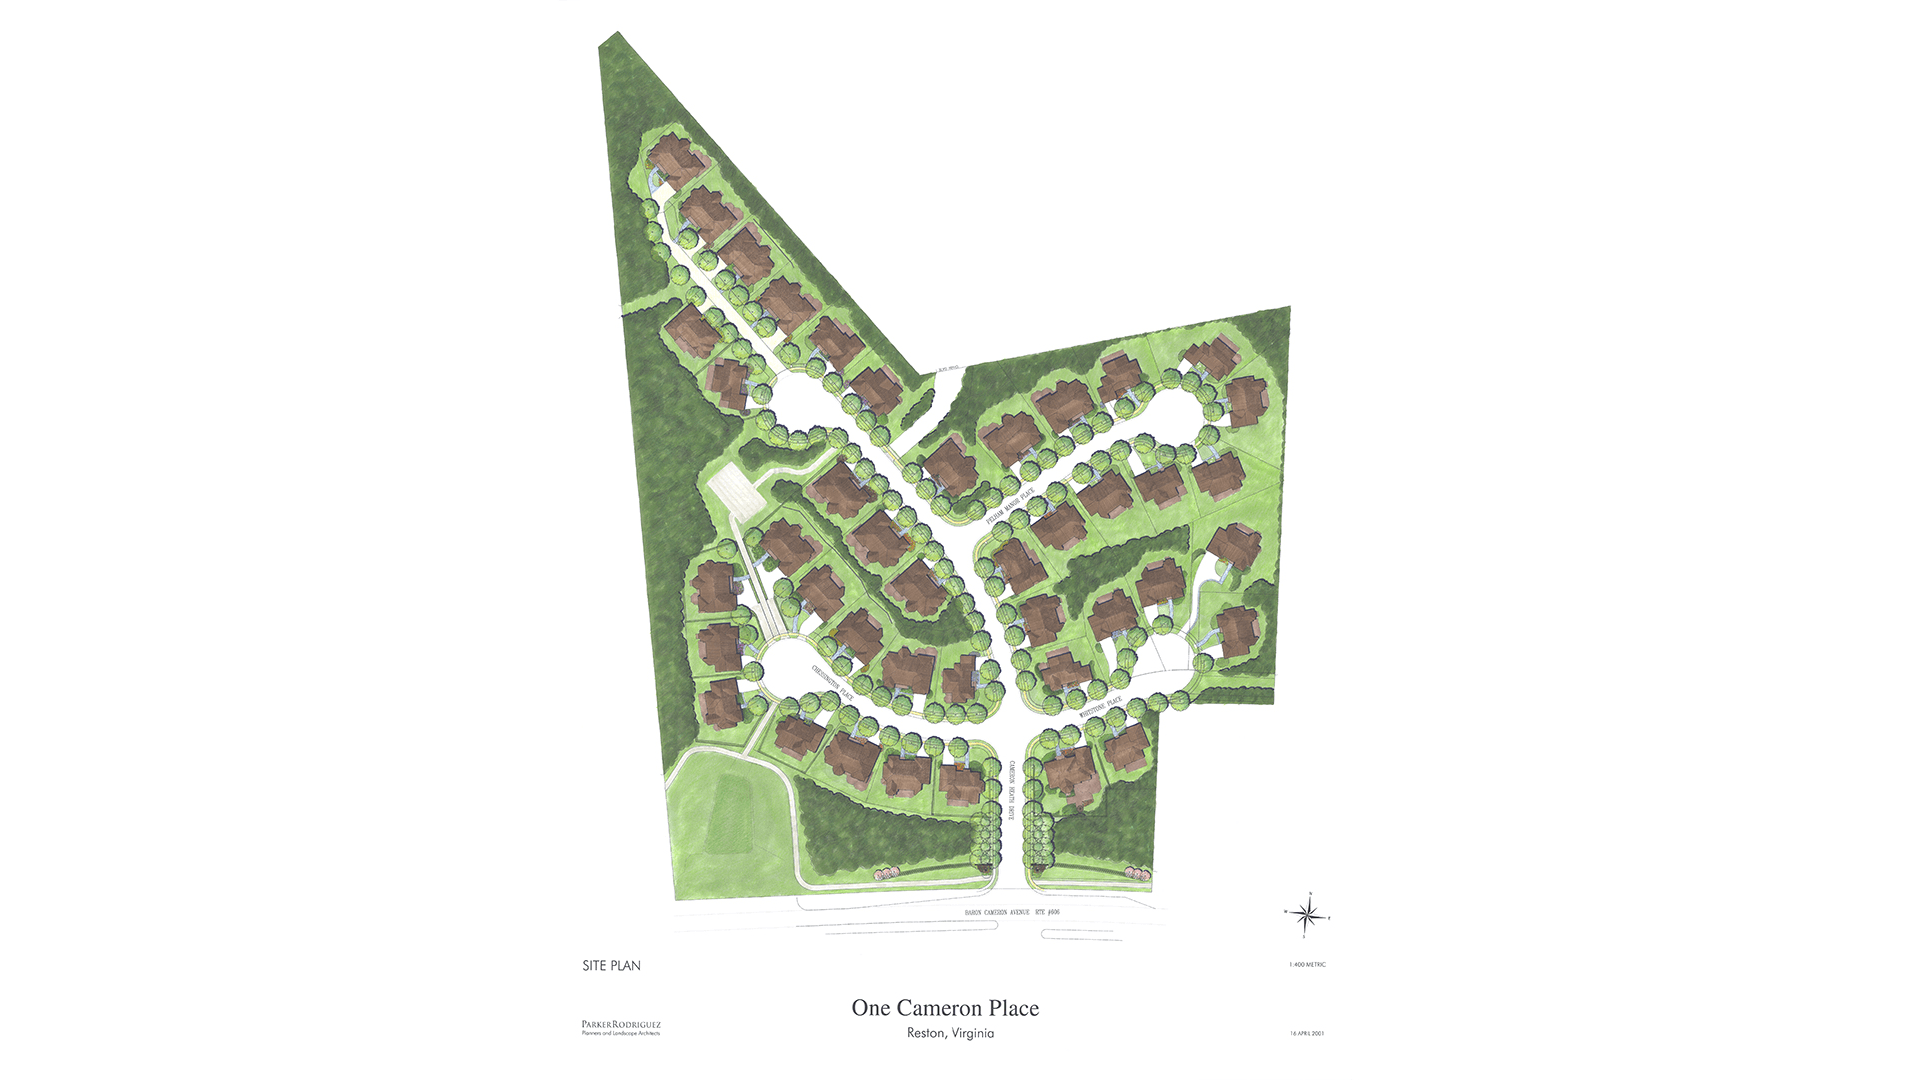 The Site Plan from One Cameron Place